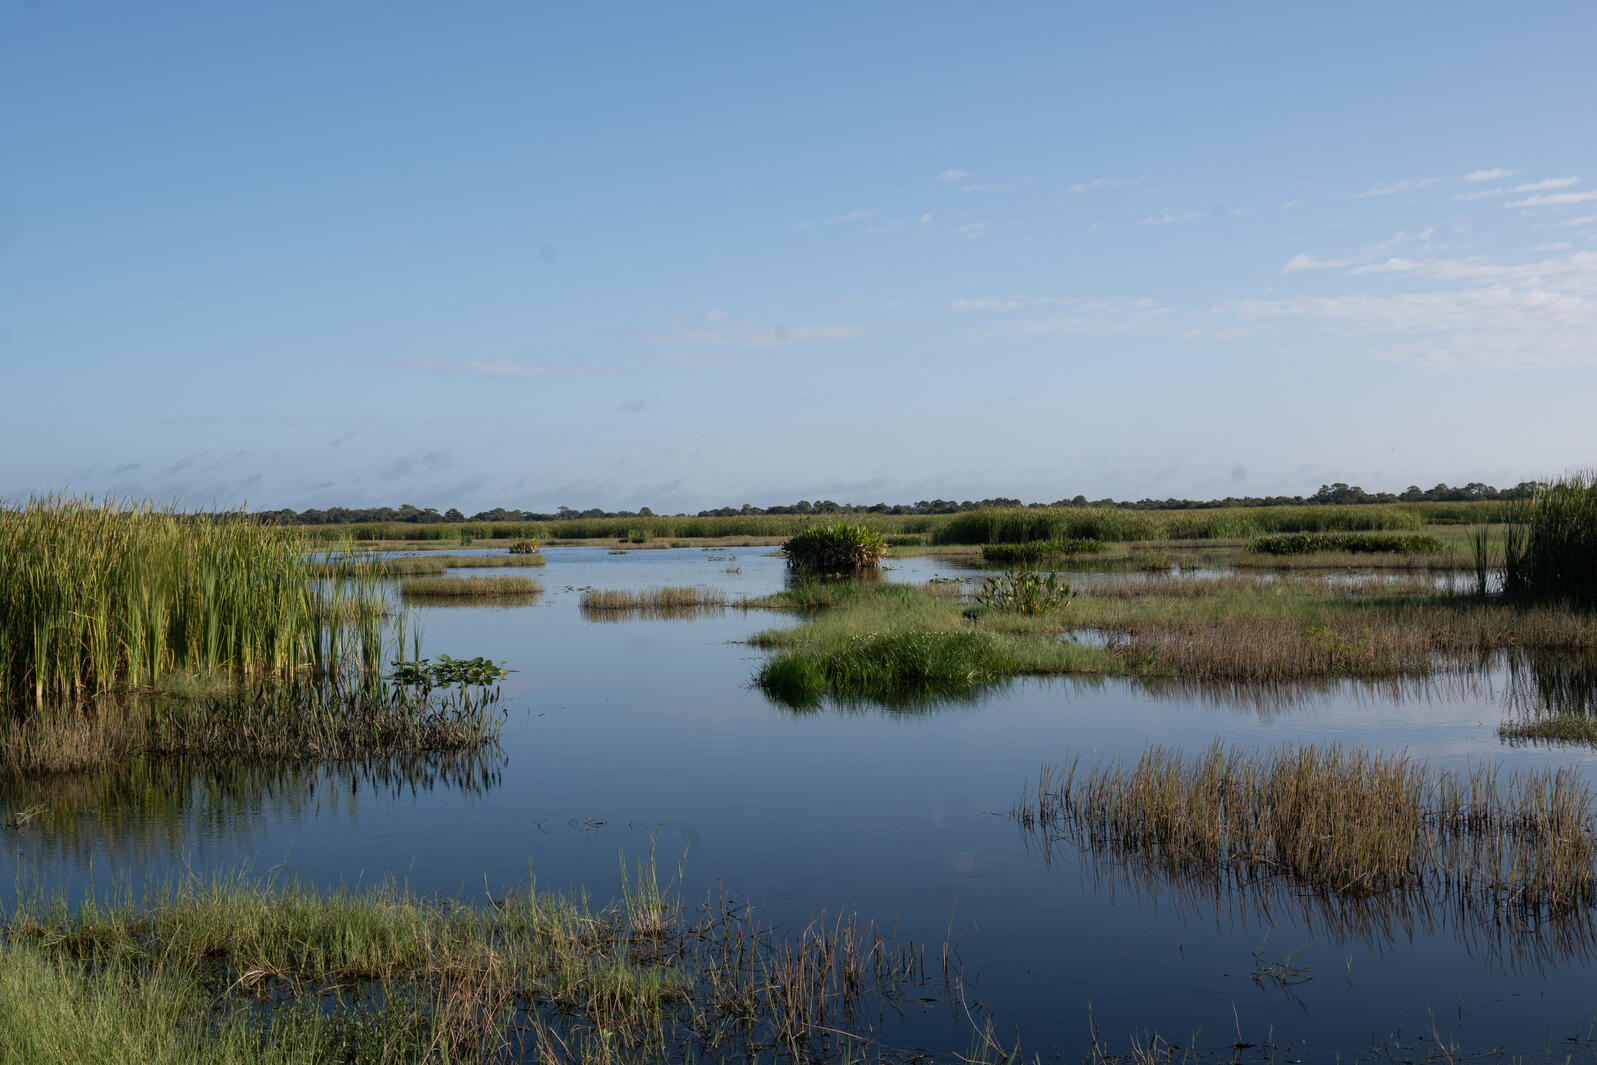 A marsh with open water and green marsh grasses under a blue sky.